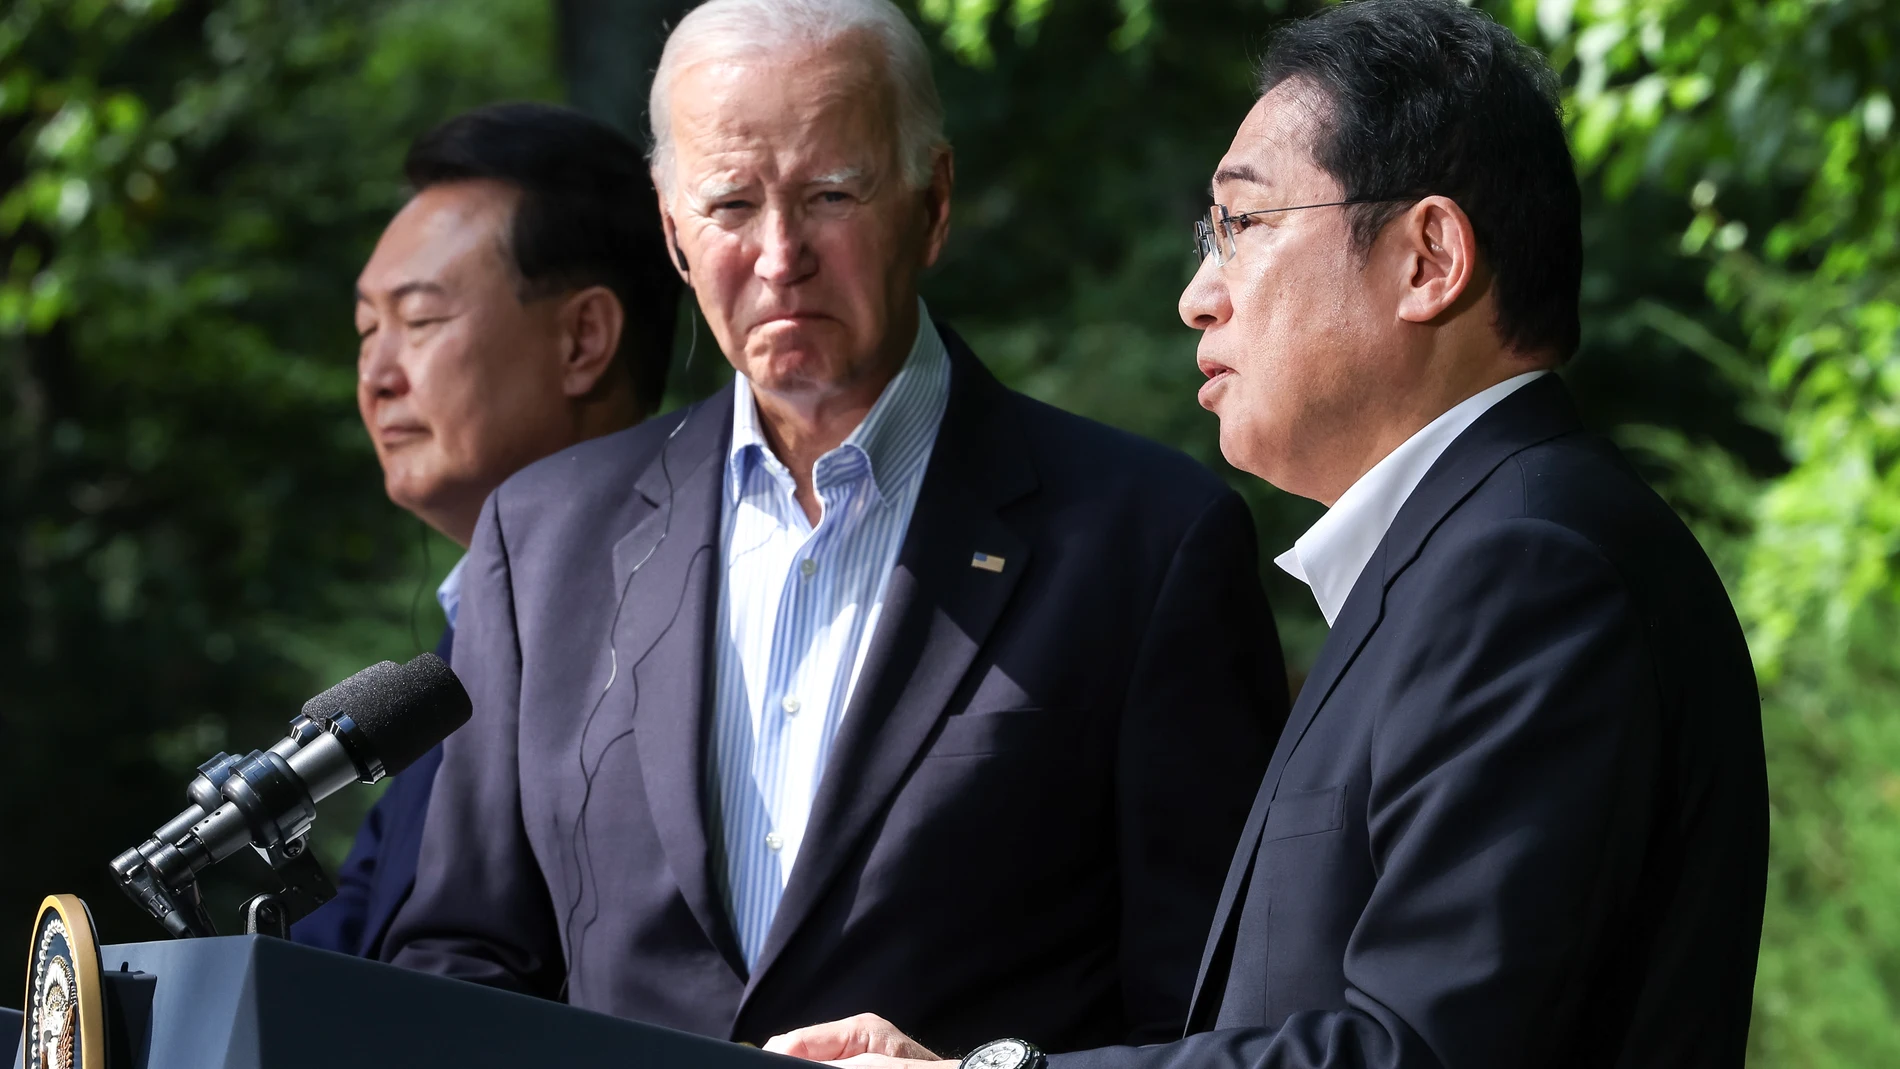 Camp David (United States), 18/08/2023.- (L-R) South Korean President Yoon Suk Yeol and US President Joe Biden listen as Japanese Prime Minister Fumio Kishida speaks during a joint press conference as part of their trilateral summit at Camp David, Frederick County, Maryland, USA, 18 August 2023. Biden hosts a trilateral summit with South Korean President Yoon Suk Yeol and Prime Minister of Japan Kishida Fumio to bolster relations and to discuss global security and trade issues. (Japón, Corea ...